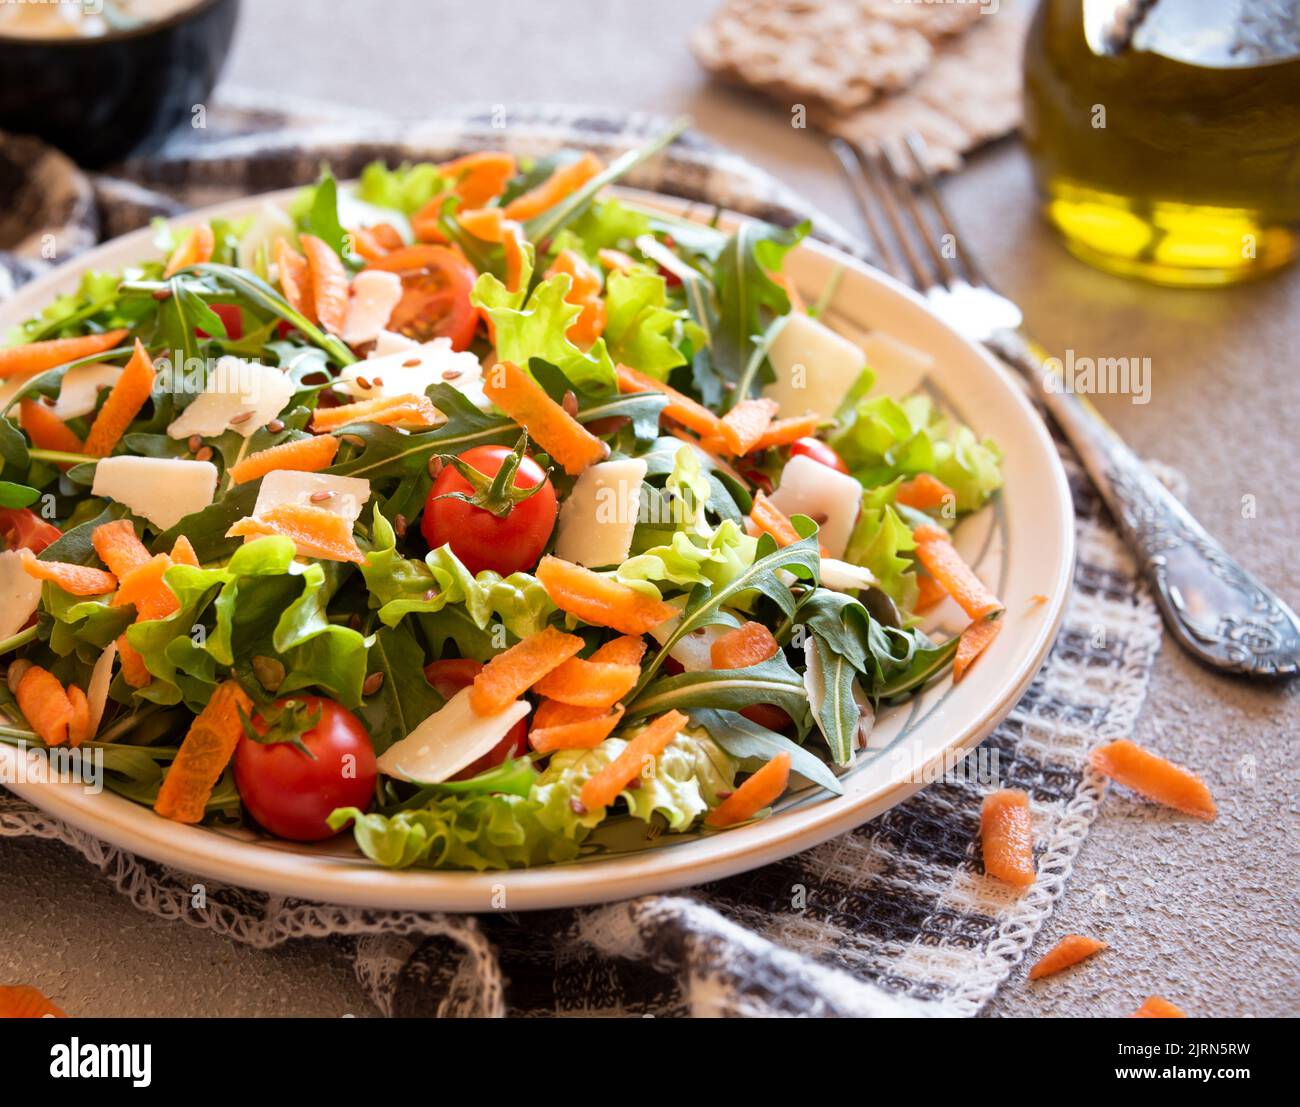 Fresh vegetables salad with tomatoes, arugola, parmesan cheese and other ingredients, healthy food Stock Photo